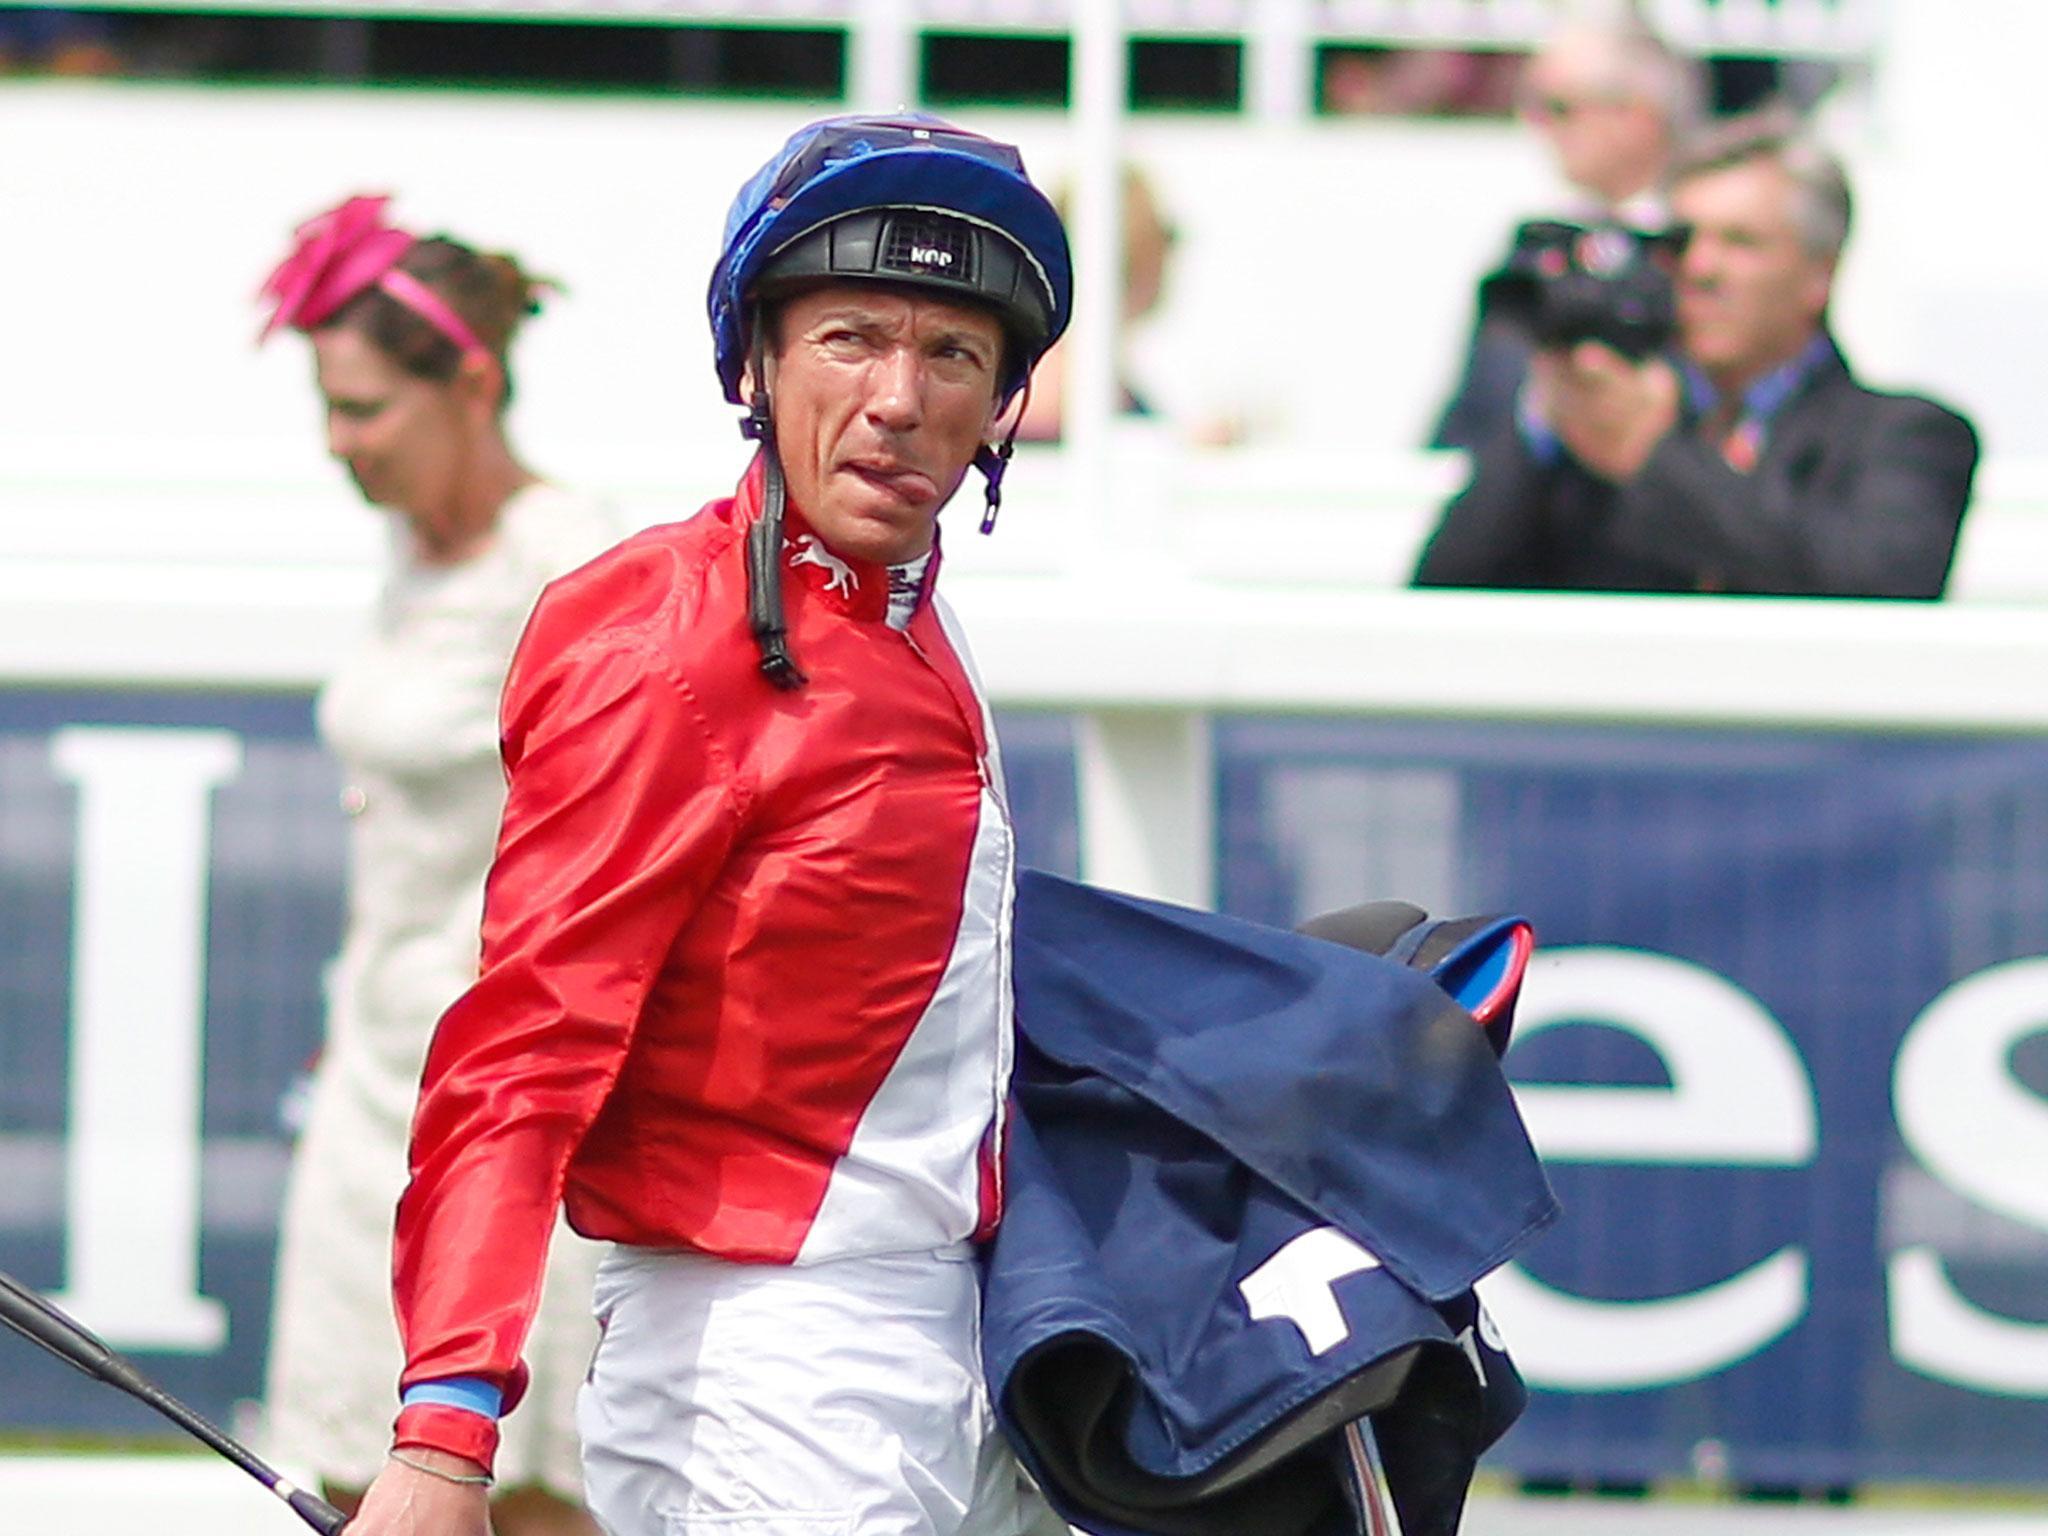 Frankie Dettori will miss the whole of Royal Ascot